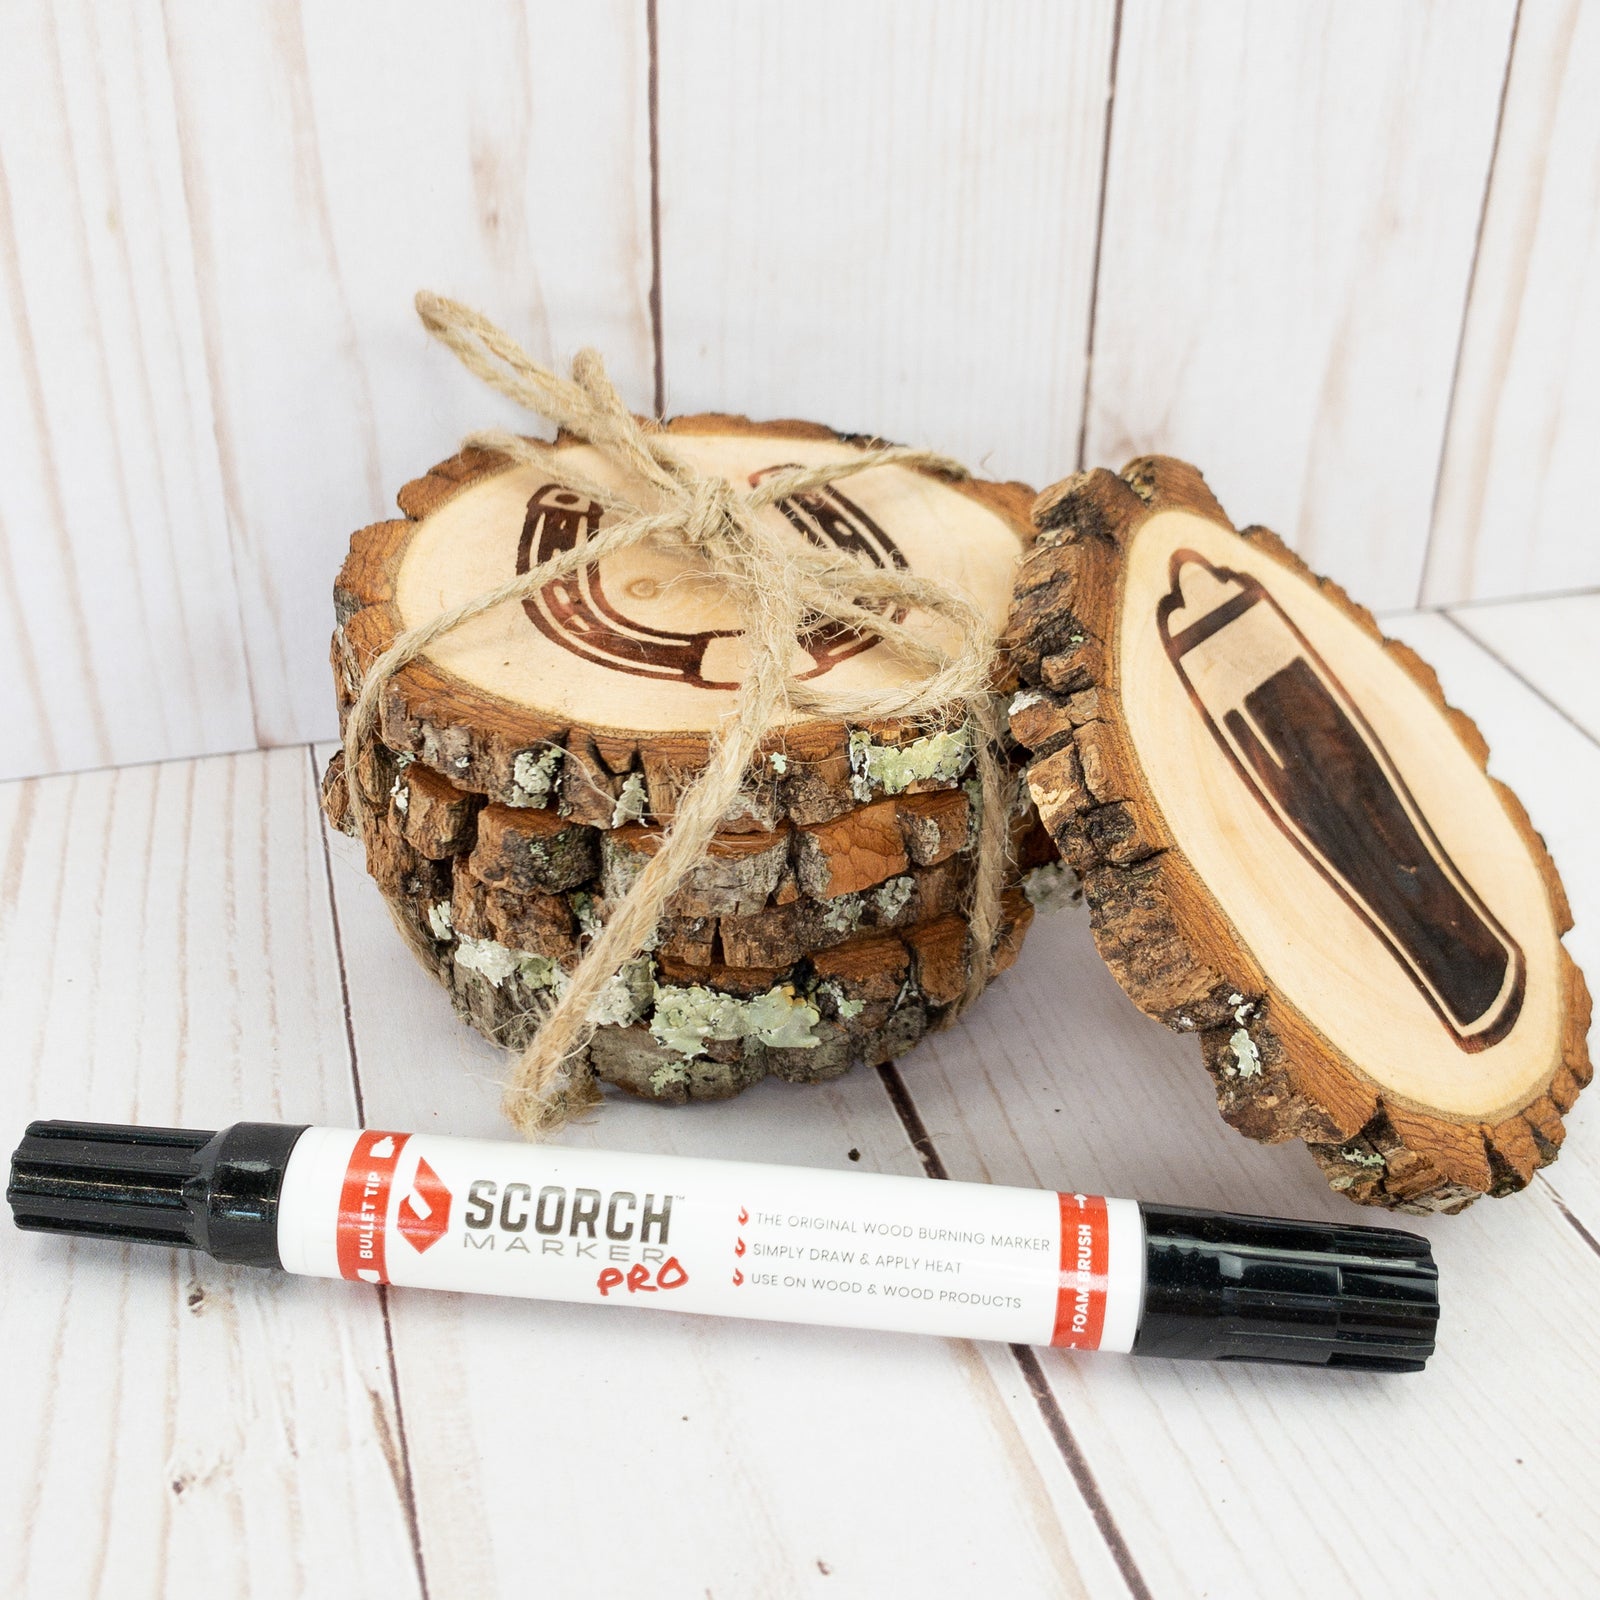 Scorch Marker Pro - 3 Pack  Wood burning techniques, Wood burning